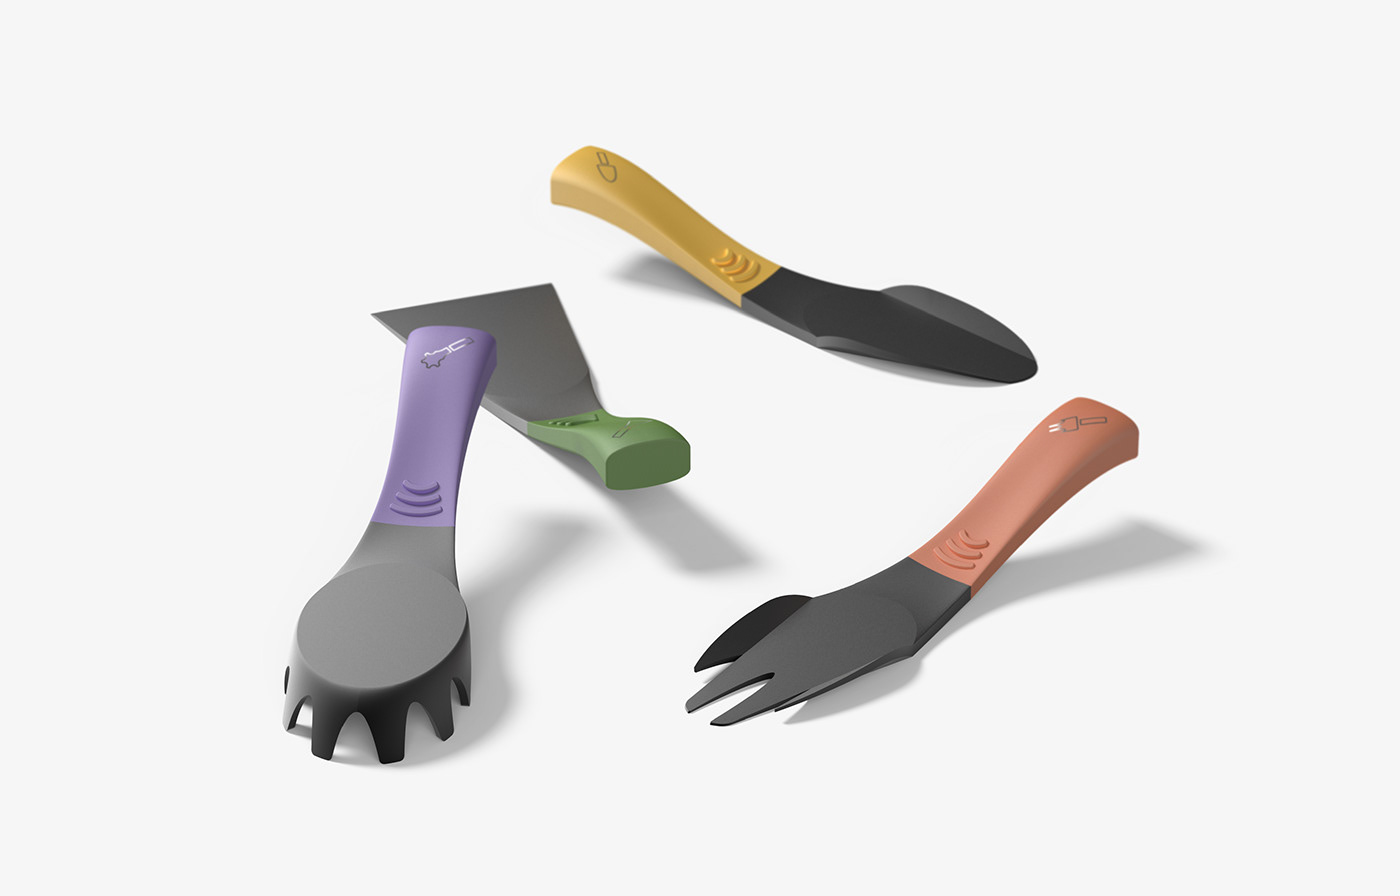 industrial design  product design  Farming tool  KITCHENWARE tool farmer gardening tool color city farm agriculture